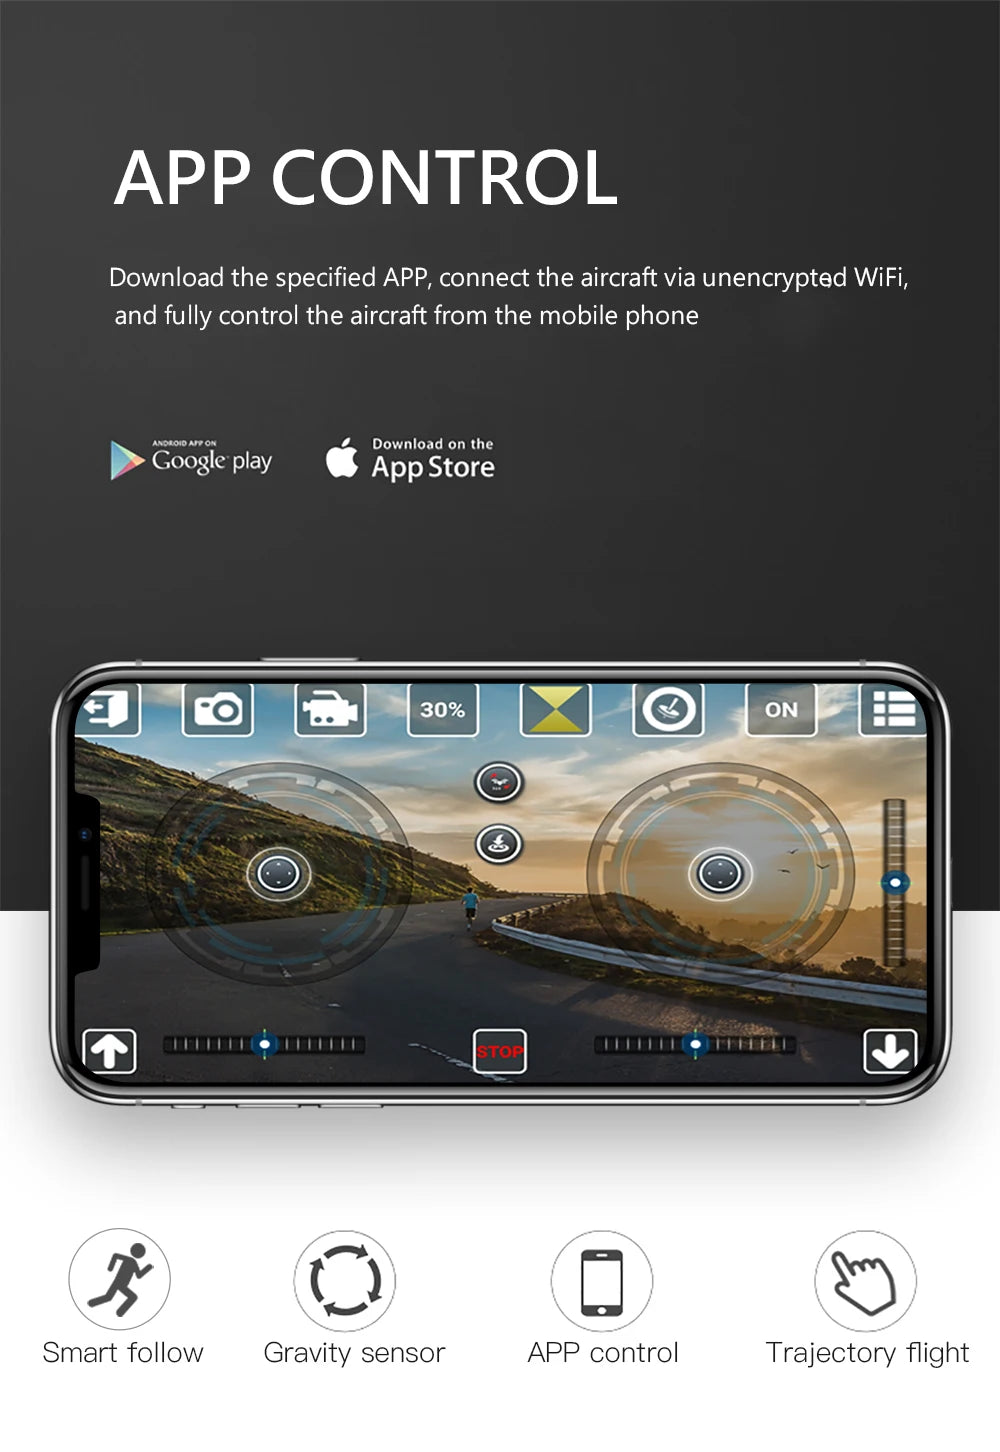 SG106 Drone, app control download the specified app, connect the aircraft via unencrypt